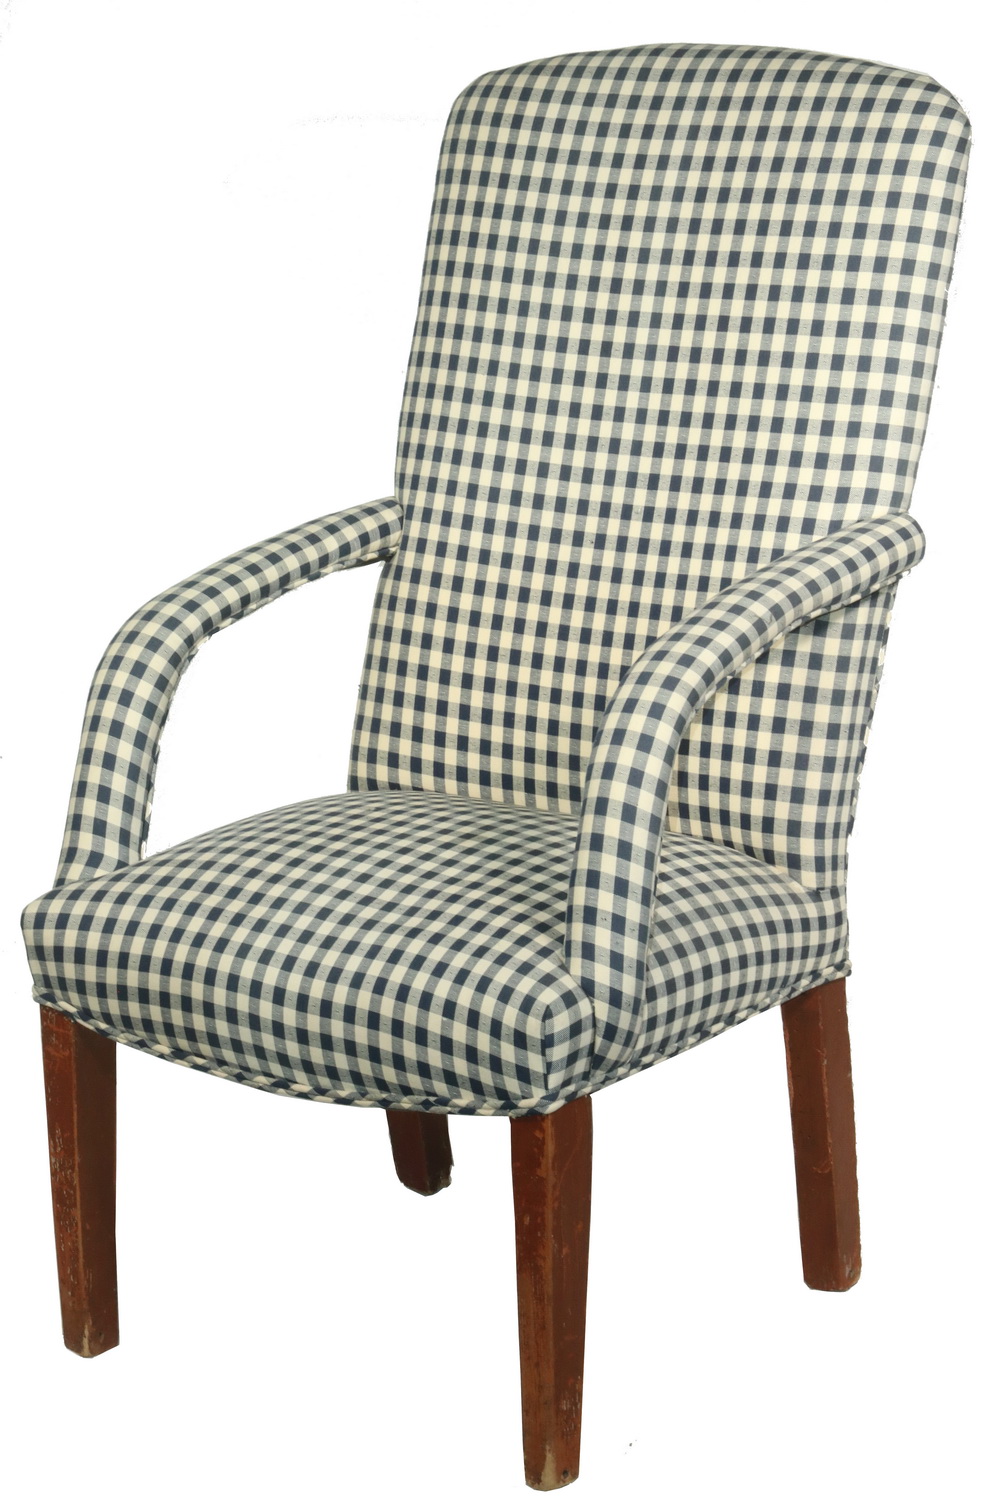 UPHOLSTERED COUNTRY ARMCHAIR 19th